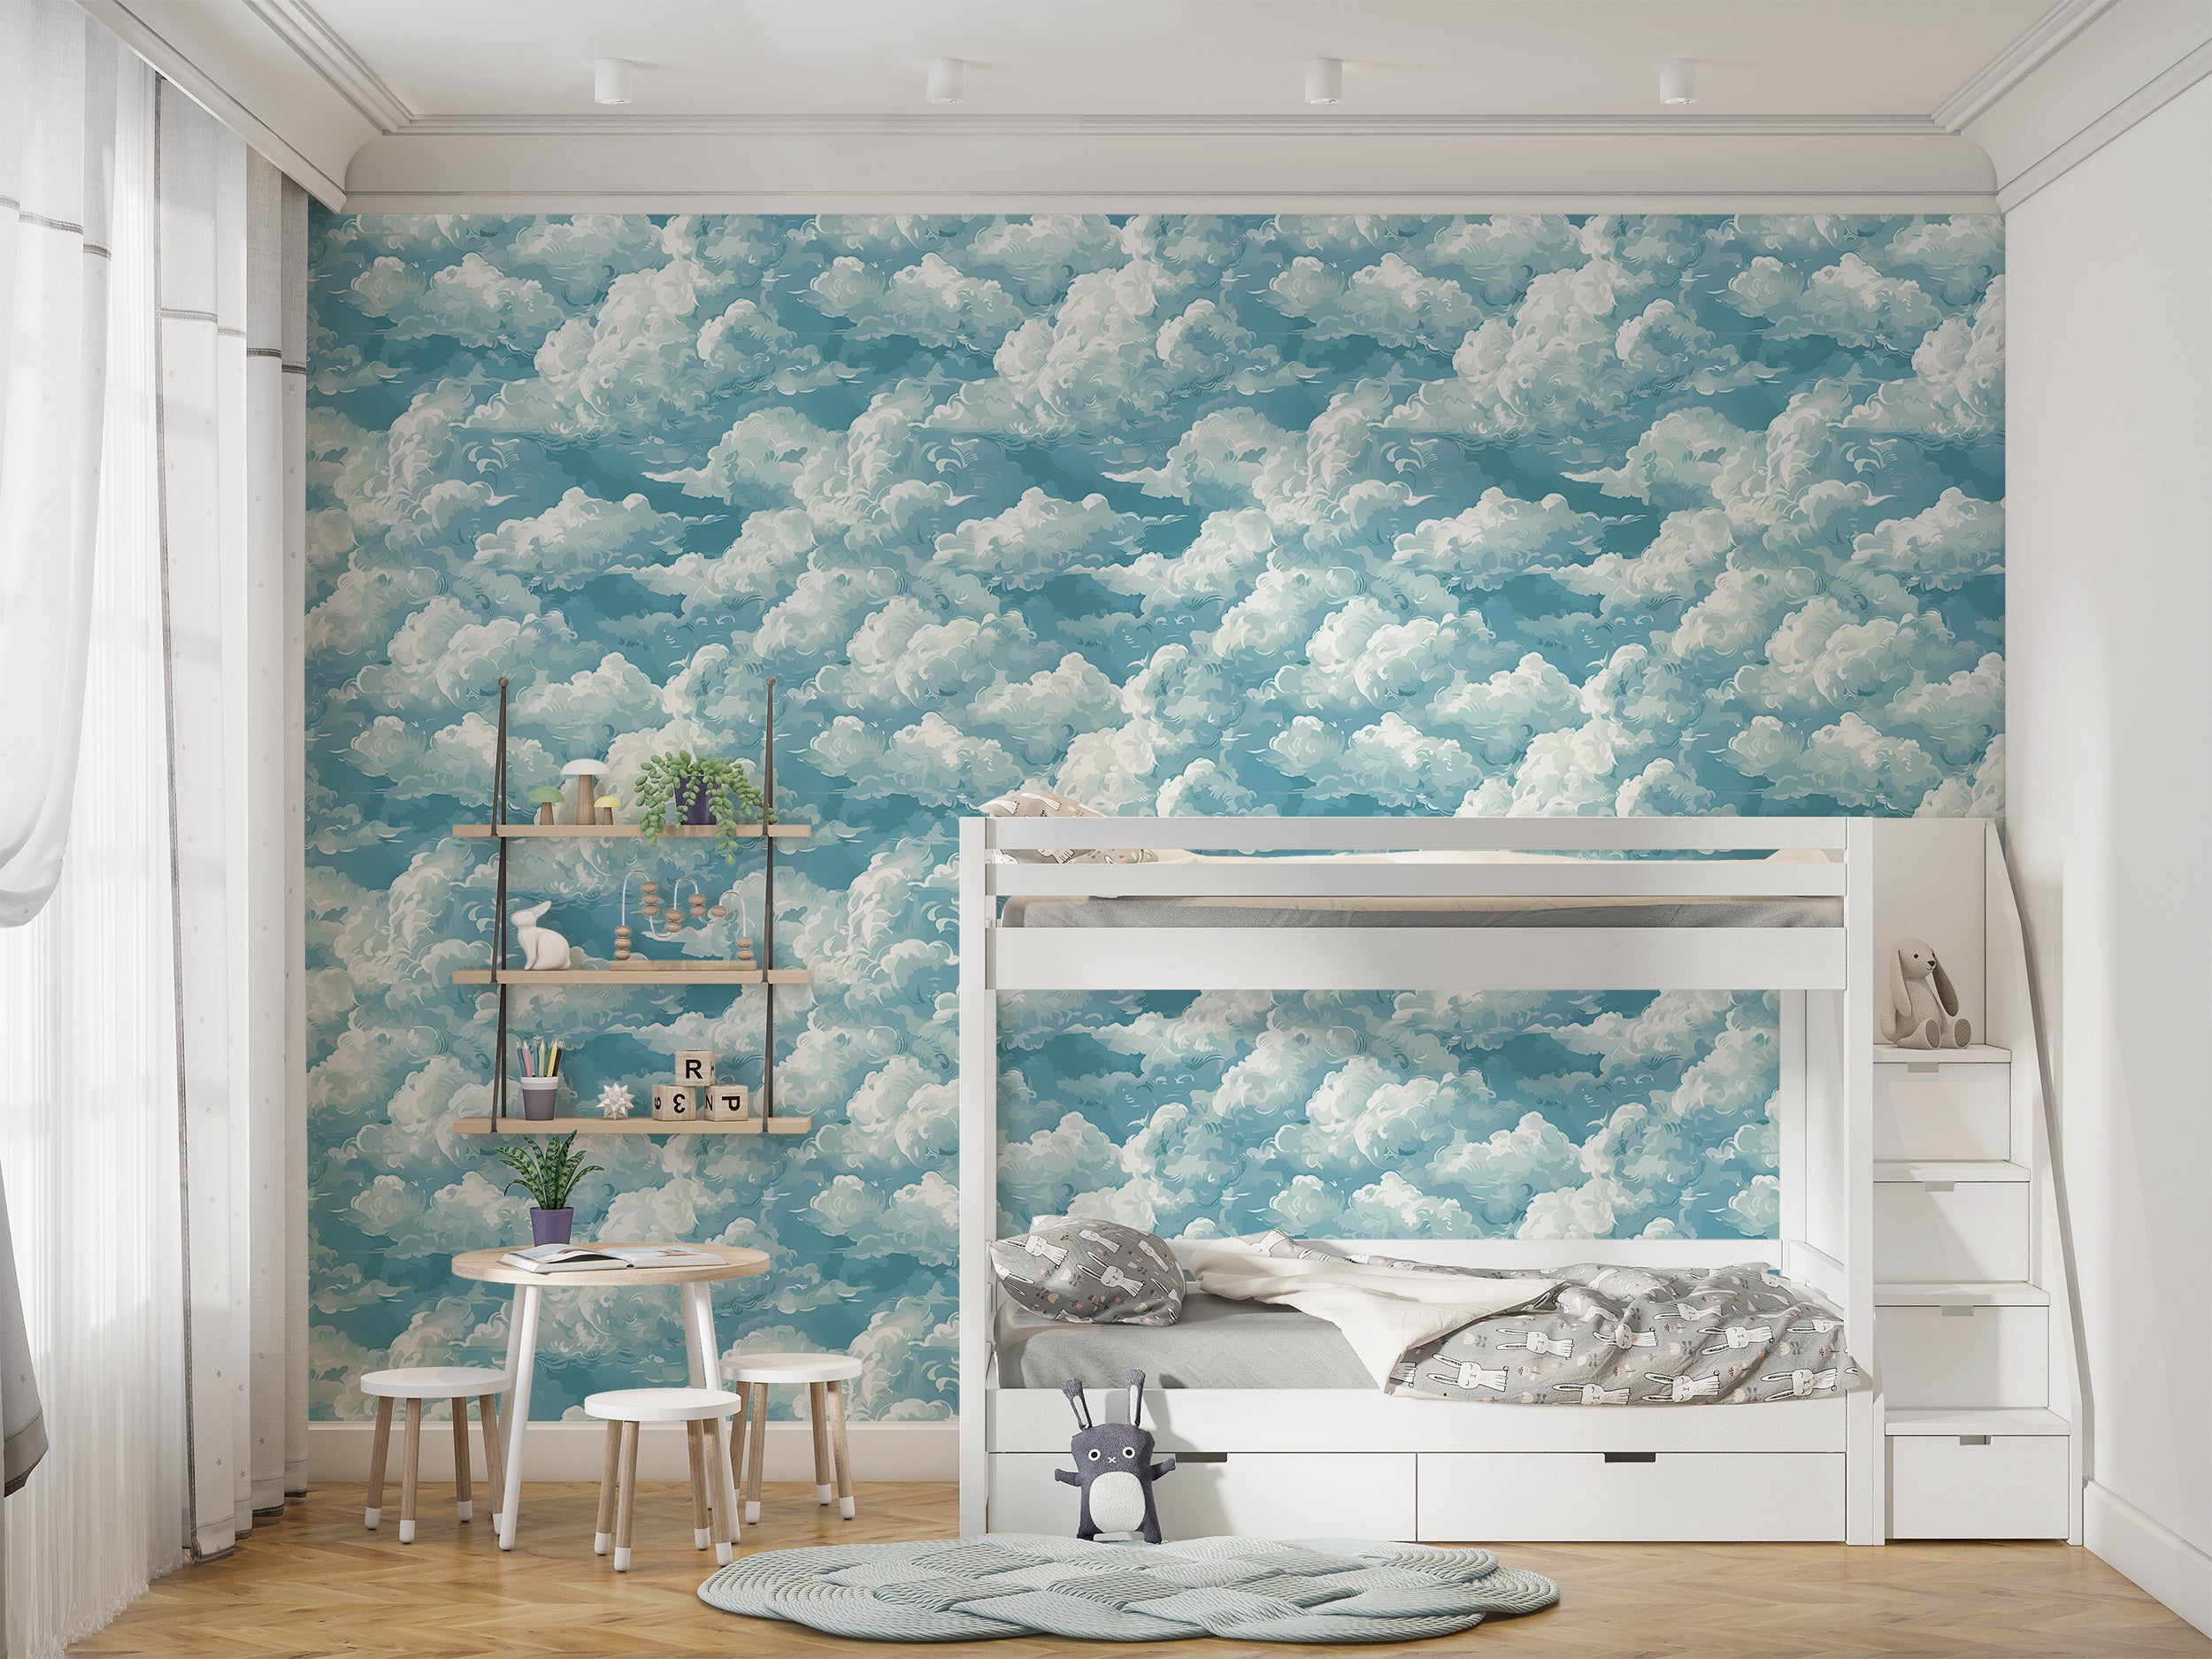 Peel and stick fluffy clouds wallpaper Nursery sky theme wall decor